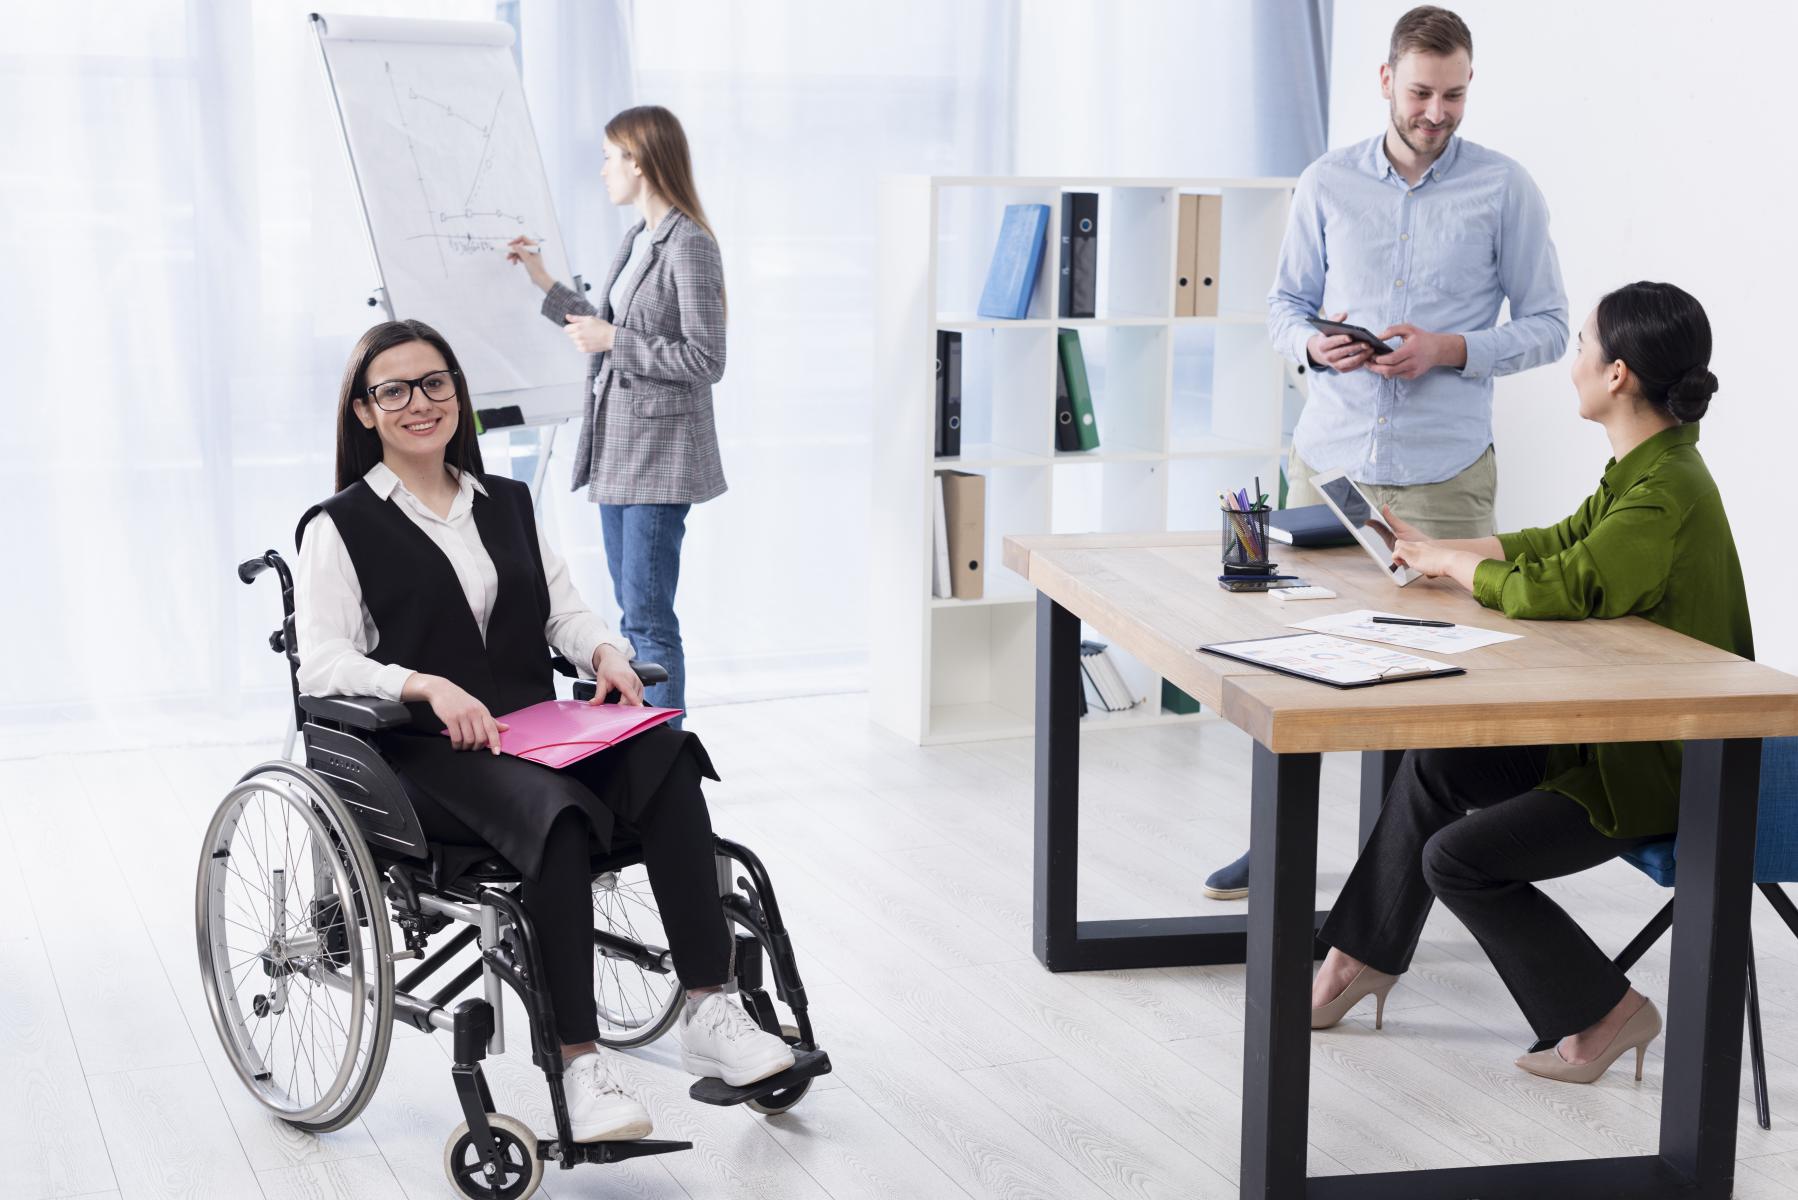 A landscape of office workers working together, made up of diverse races. A lady with disability in a wheelchair has a file holder on her lap and is smiling